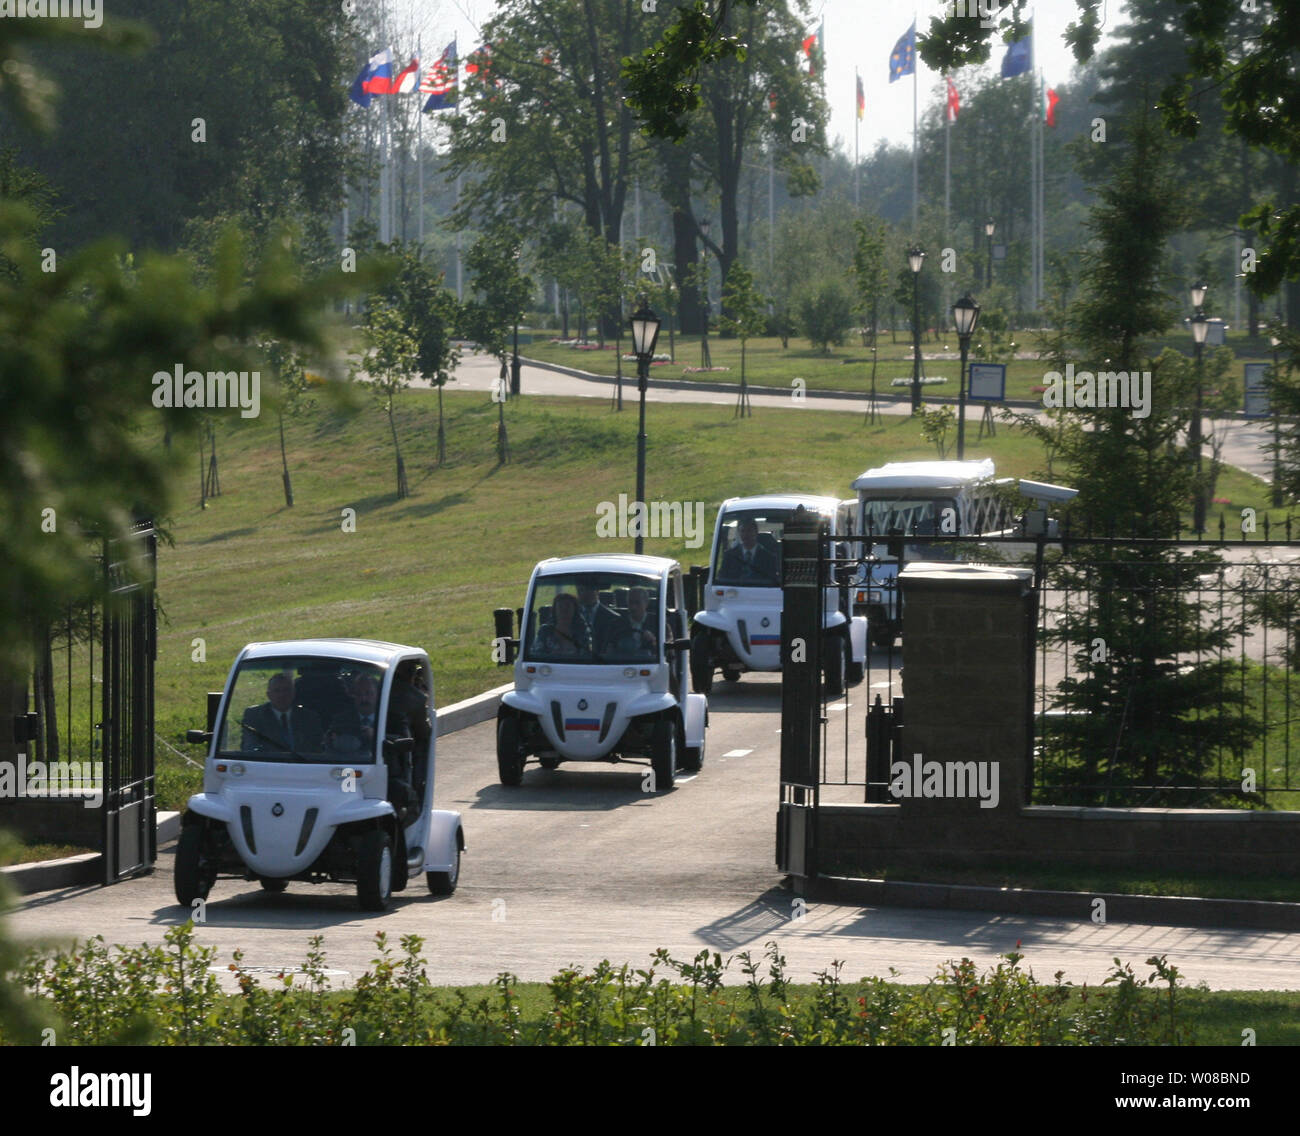 Russian President Vladimir Putin drives an electric car (2nd L) as he arrives with his wife Lyudmila to a dinner with U.S. President George W. Bush at the Italian Guest House in the Konstantinovsky Palace Complex in Strelna, in the outskirts of St. Petersburg on July 14, 2006. Bush is visiting Russia to attend the G8 summit this weekend. (UPI Photo/Anatoli Zhdanov) Stock Photo